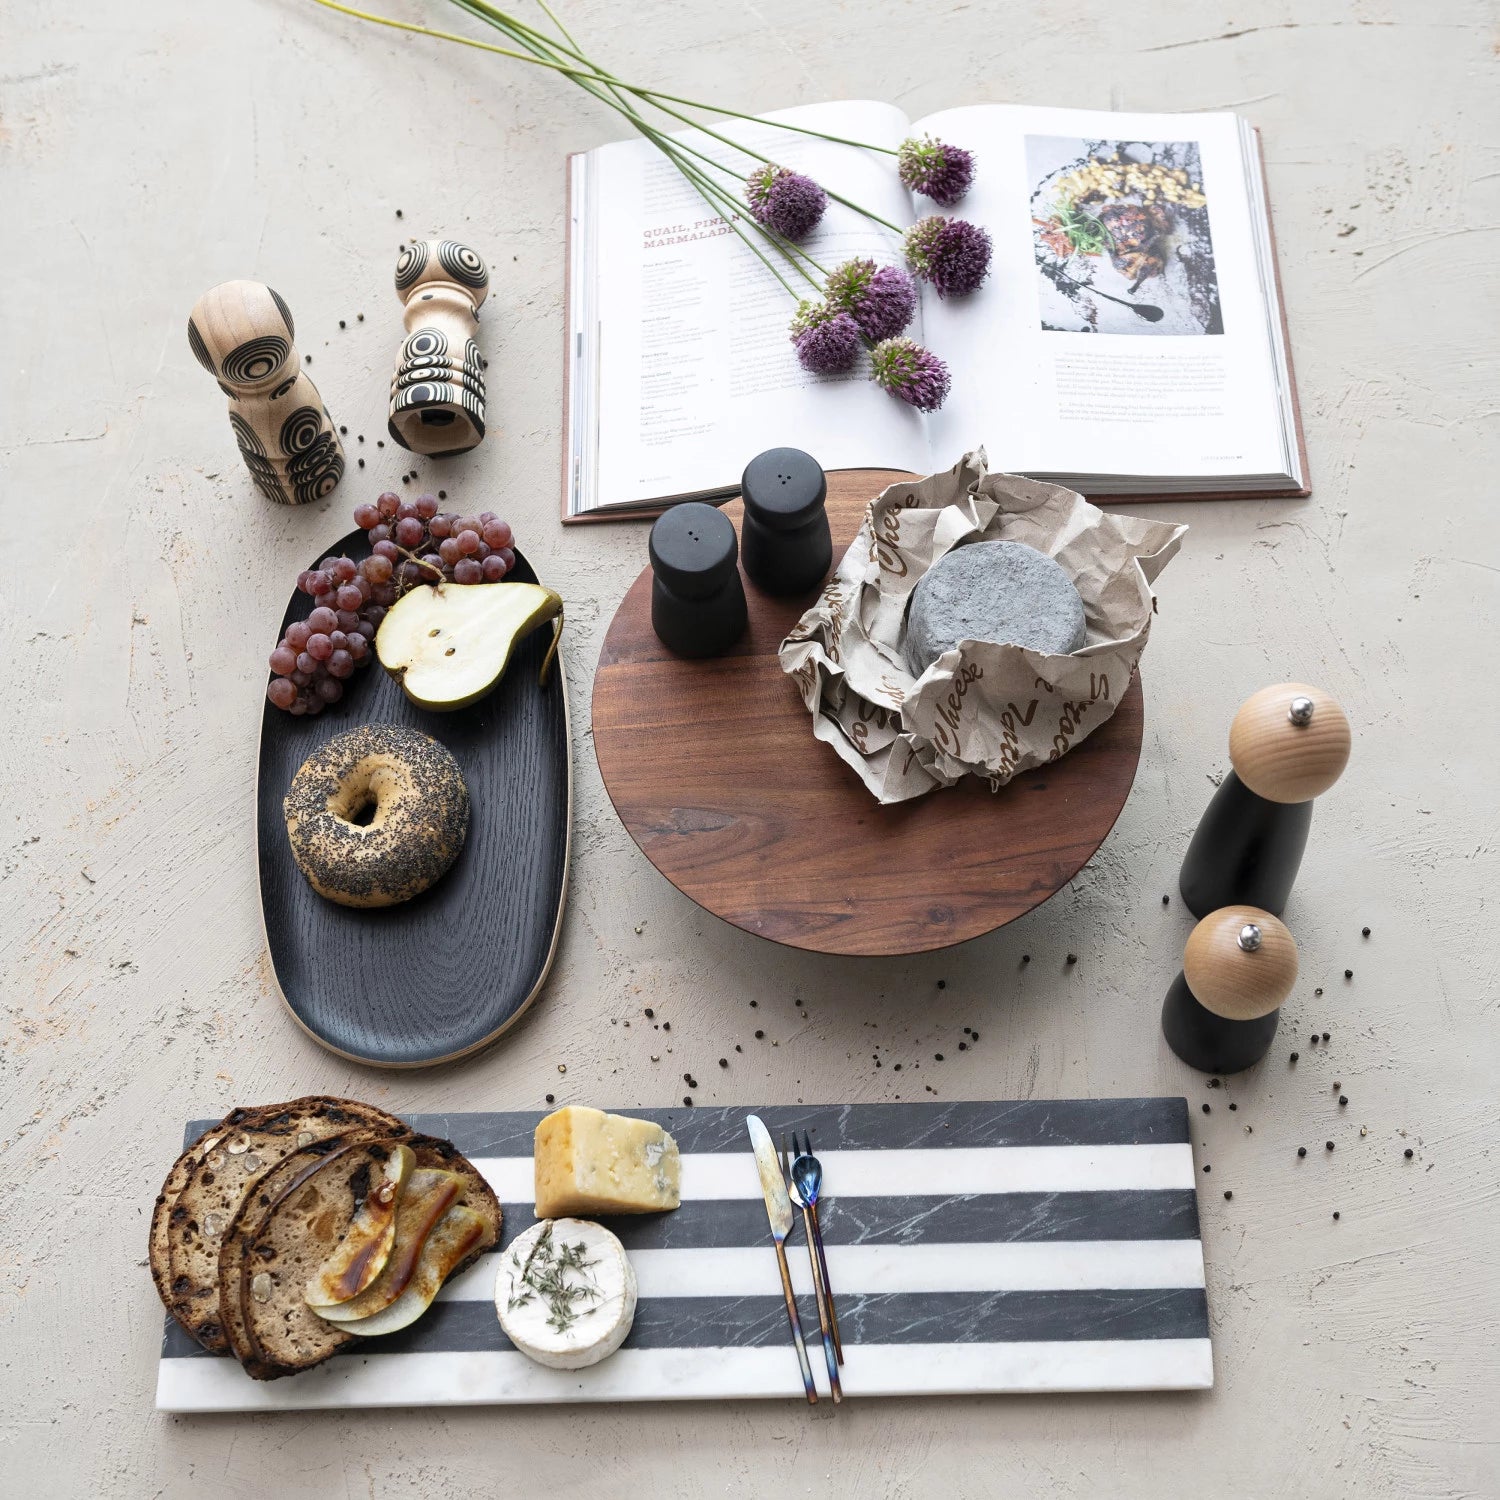 Black & White Striped Marble Cheese/Serving Board